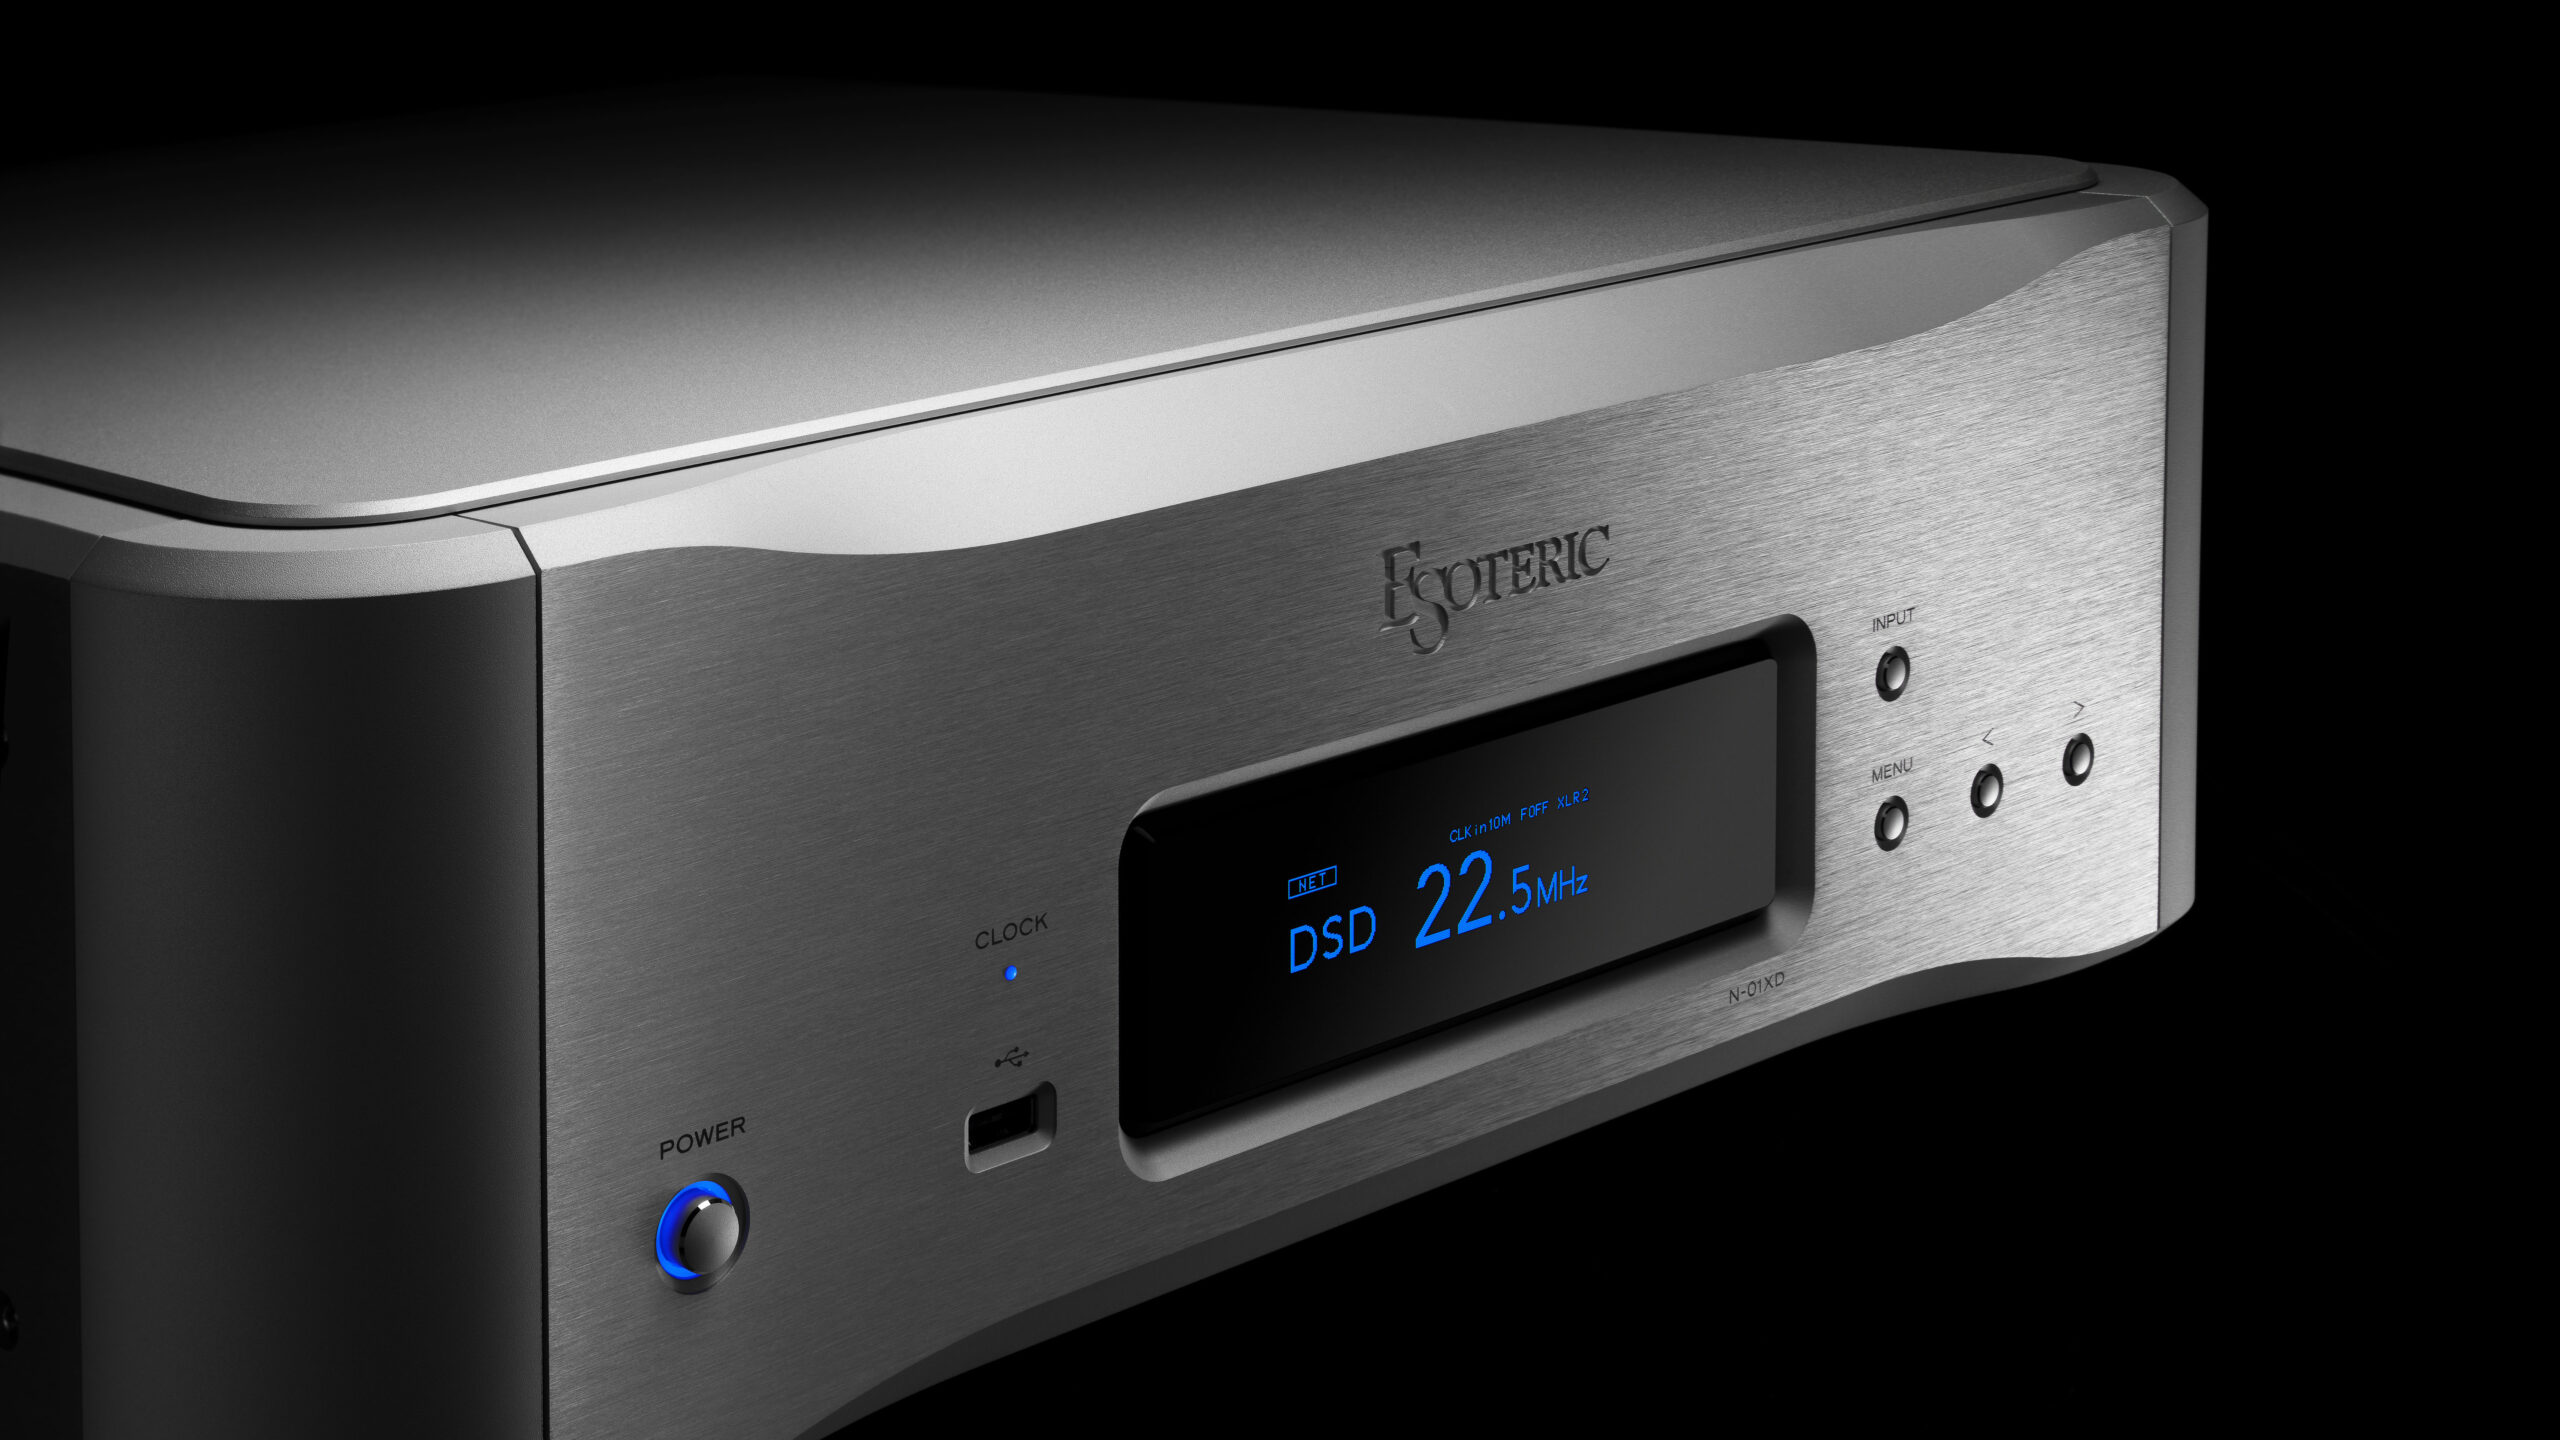 The Perfect Sound: Superior sound quality achieved with new N-01XD SE model